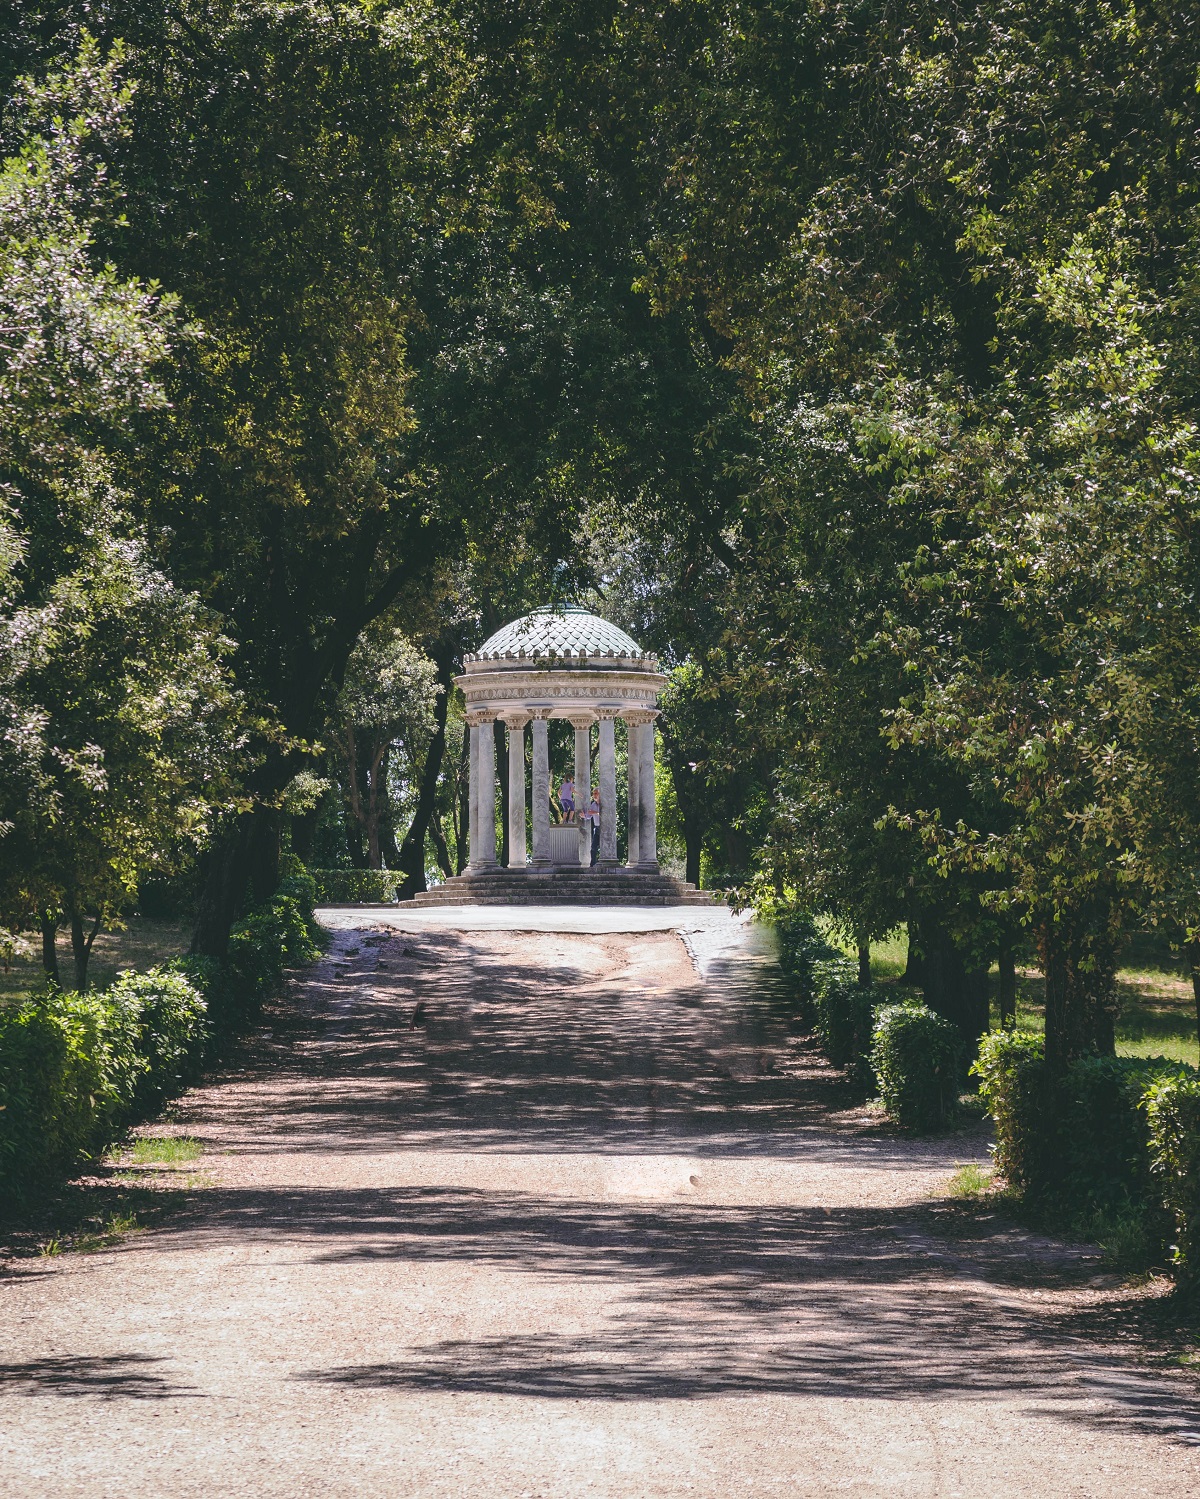 Wide path surrounded by greenery at the Borghese Villa in Rome